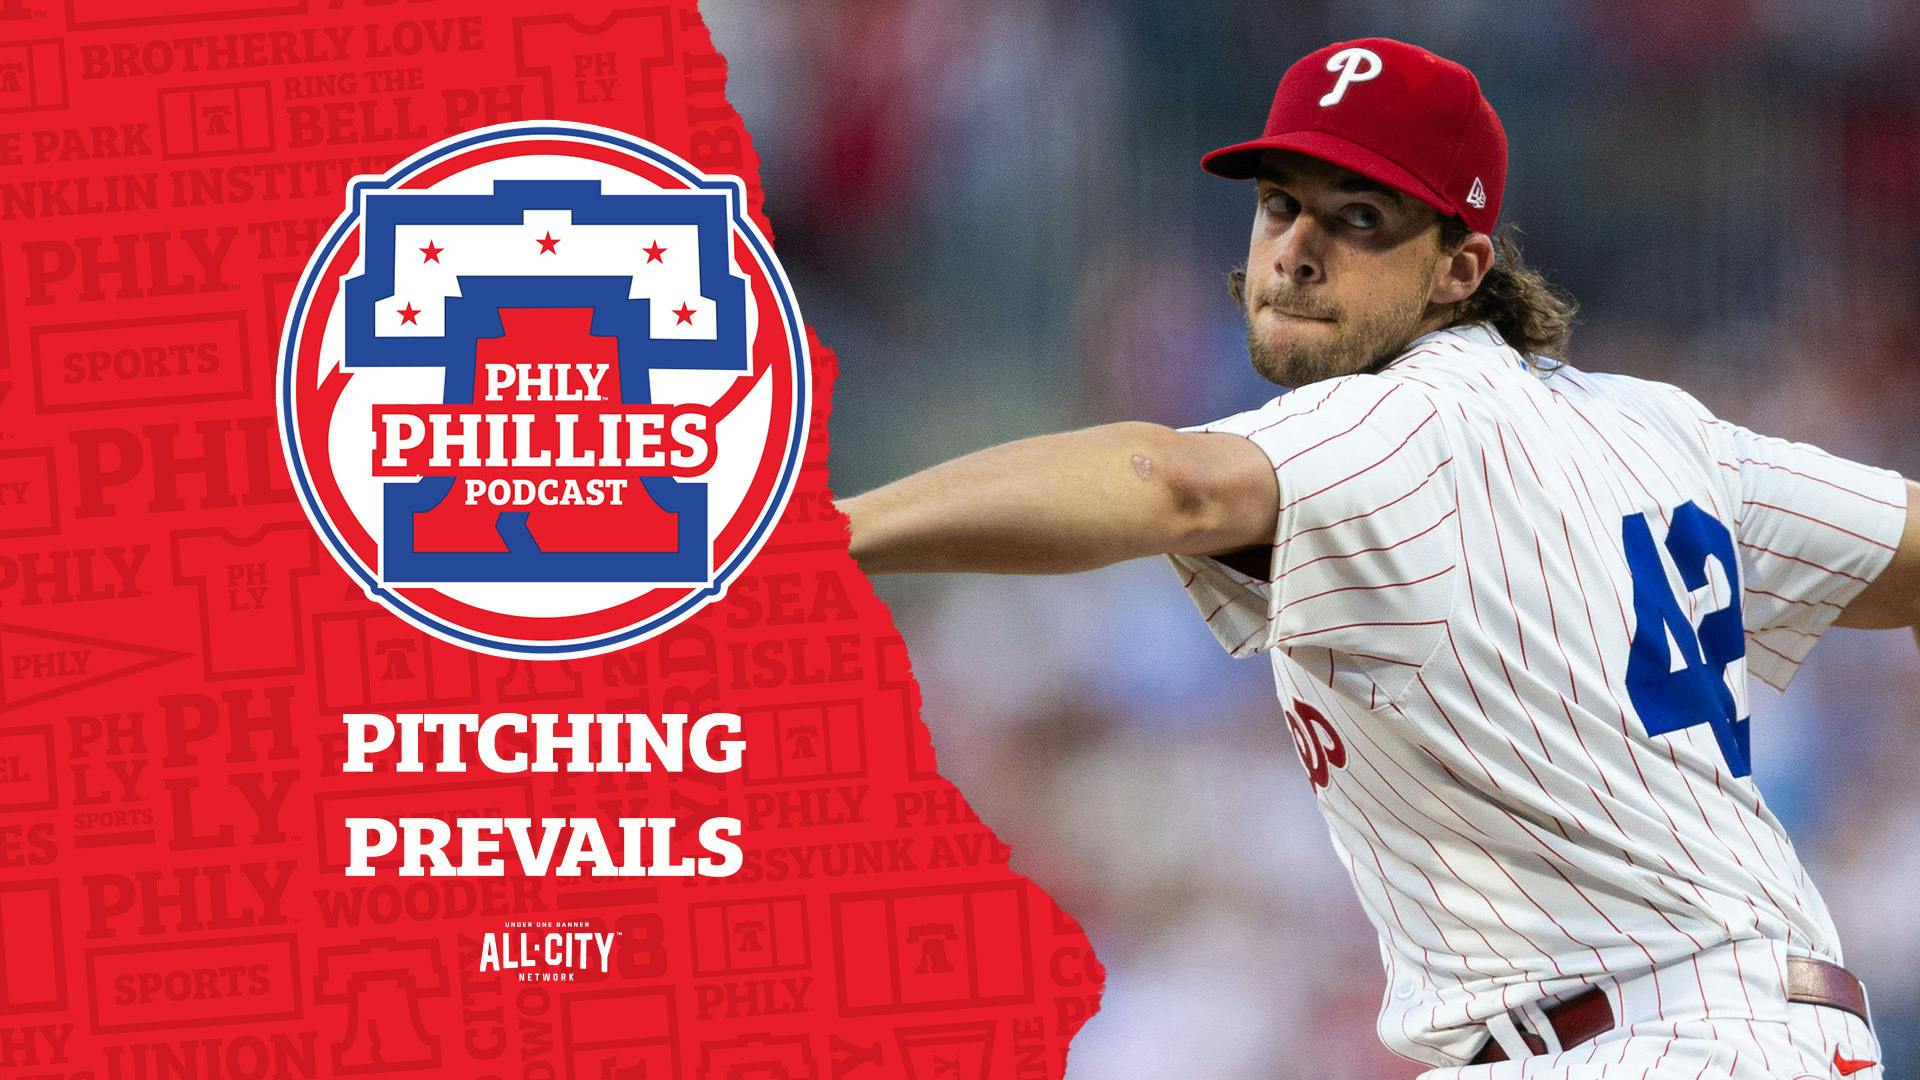 PHLY Phillies Podcast | Aaron Nola dominates, Cristian Pache walks it off as Phillies beat Colorado Rockies 2-1 in extras